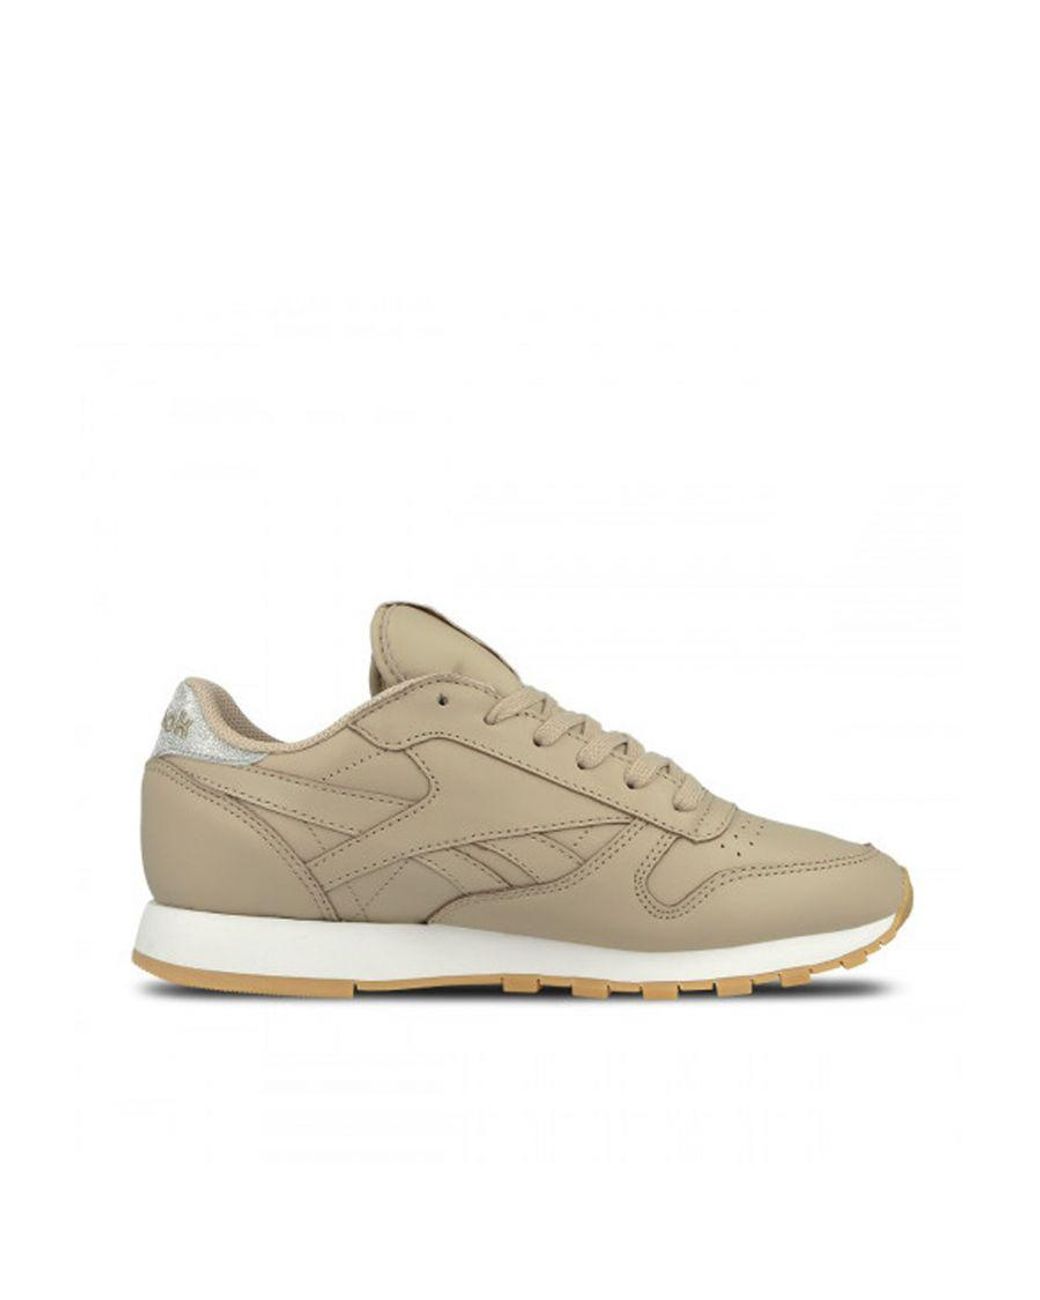 Reebok Classic Met Diamond Lace-up Beige Smooth Leather Bd4424 Leather in Natural | Lyst UK